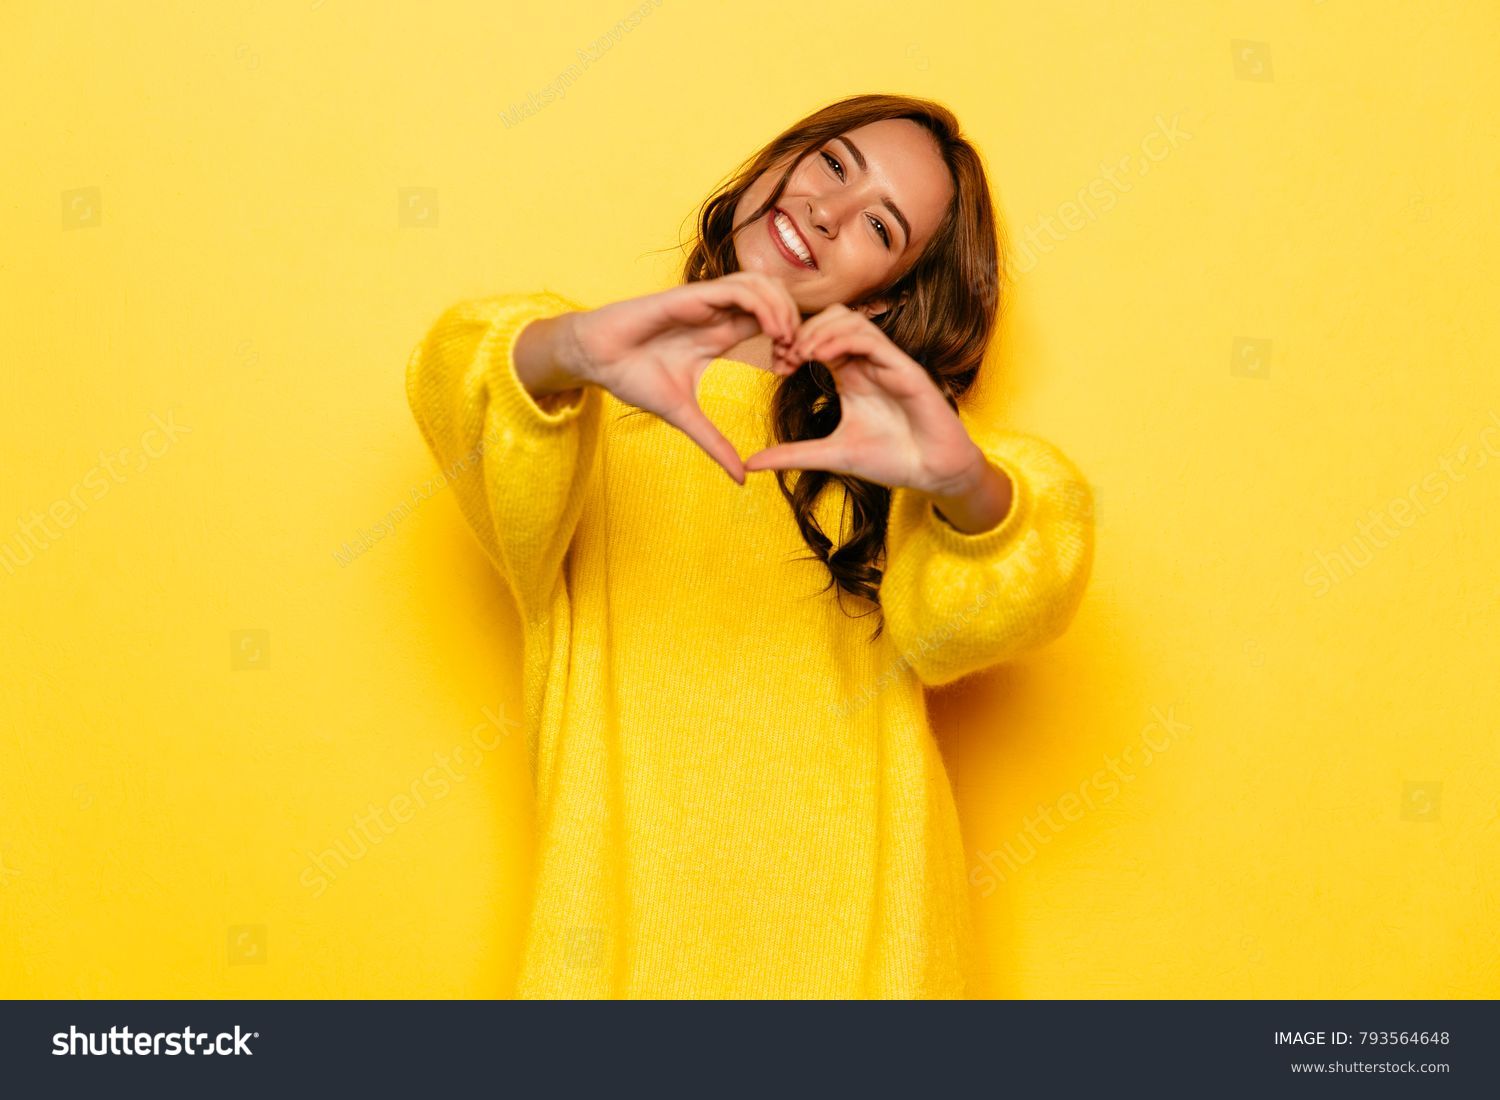 Smiling young girl in yellow sweater showing heart with two hands, love sign. Isolated over yellow background. #793564648